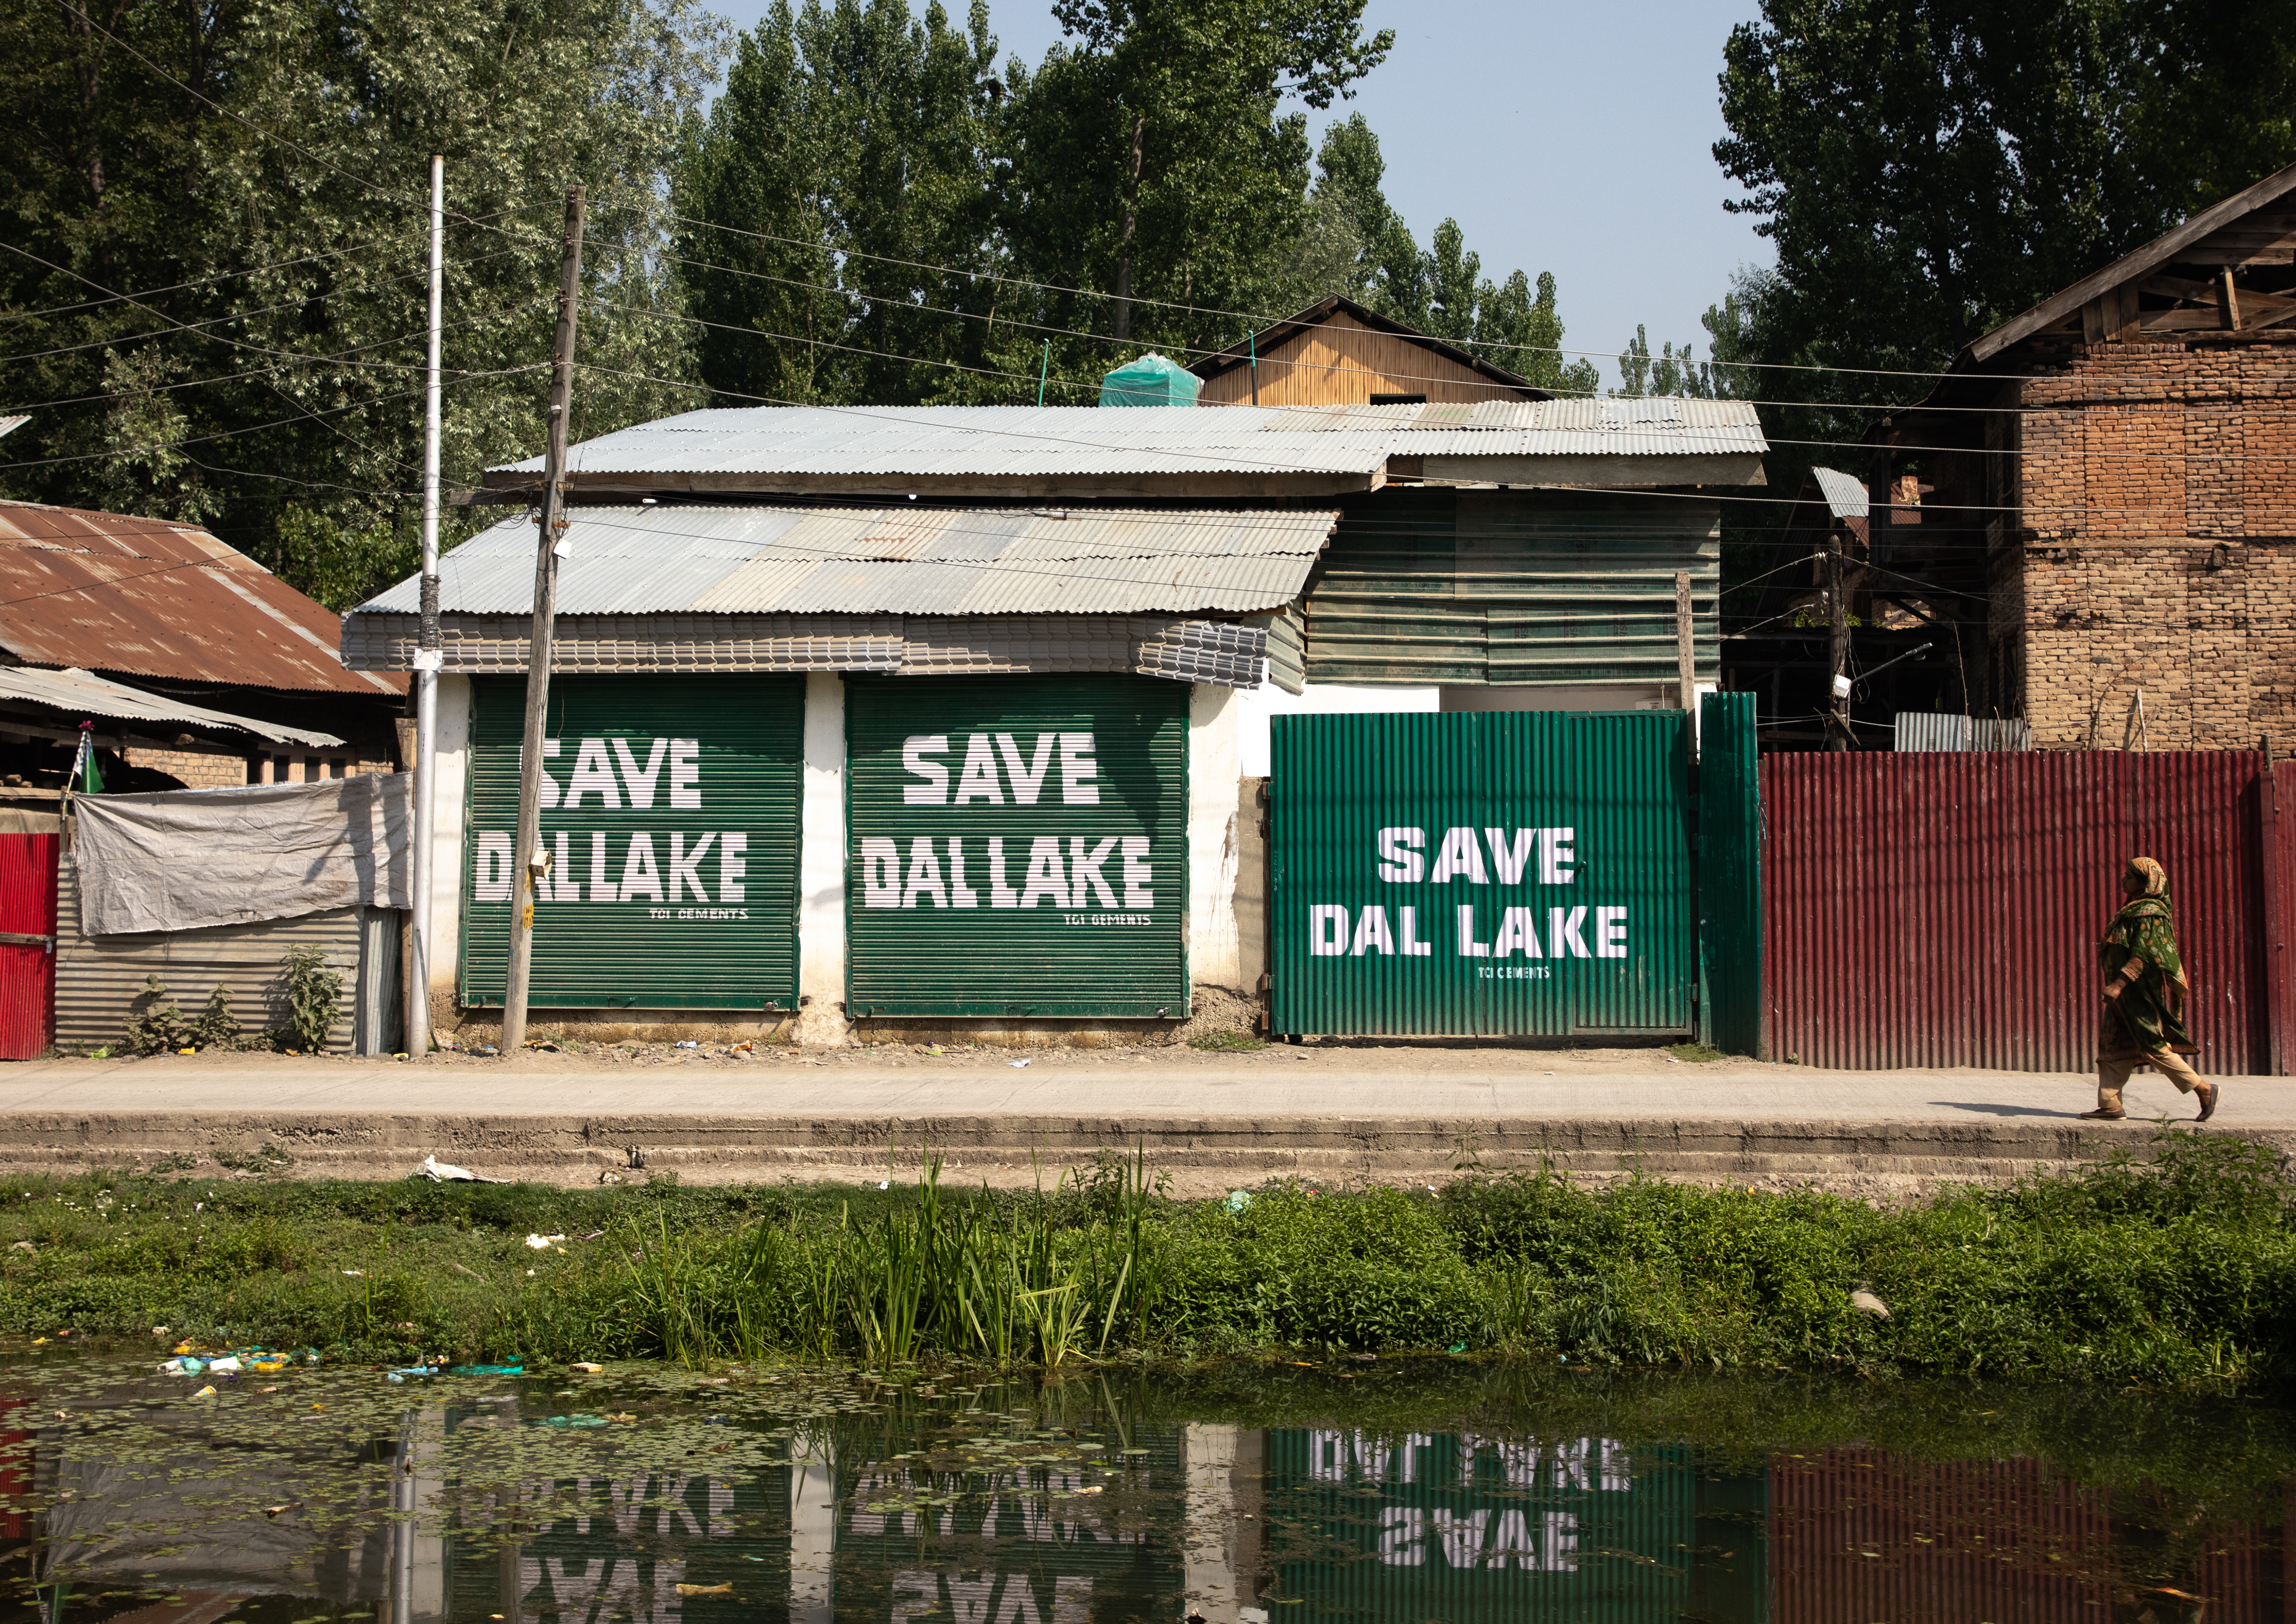 Graffiti on the exterior wall of a building appeals for people to "Save Dal Lake"